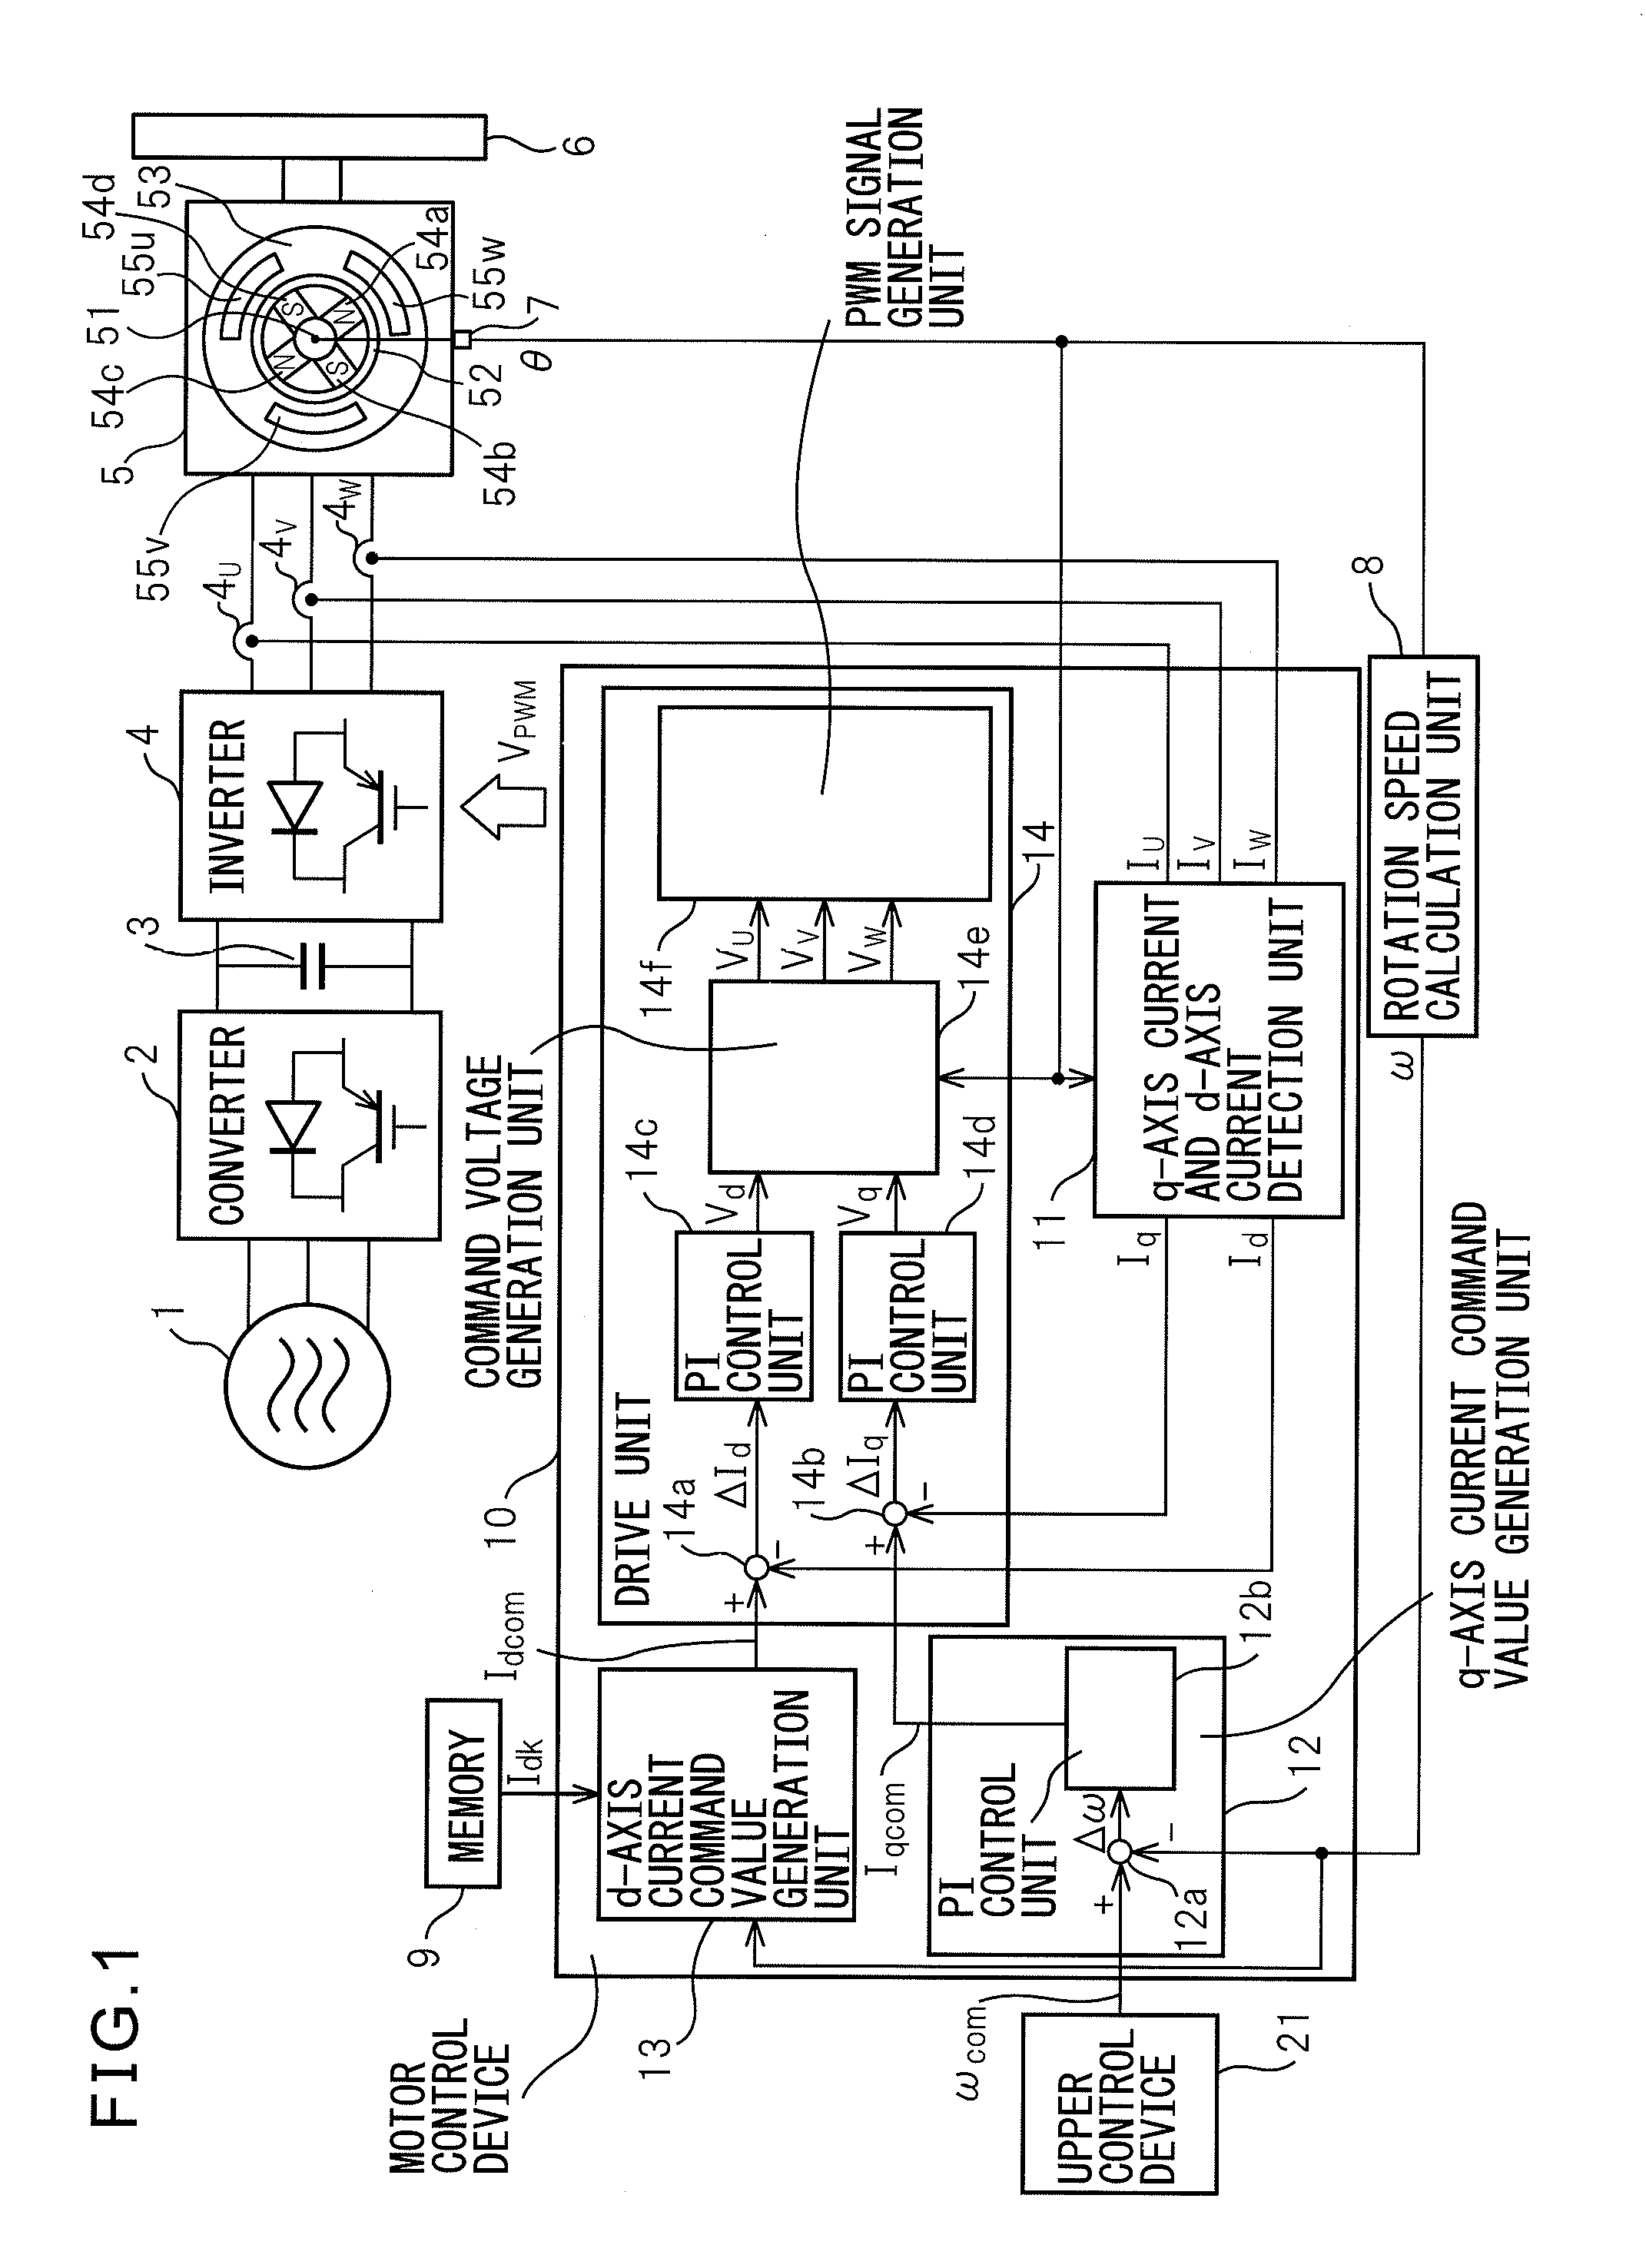 MOTOR CONTROL DEVICE THAT CONTROLS d-AXIS CURRENT OF PERMANENT MAGNET SYNCHRONOUS MOTOR